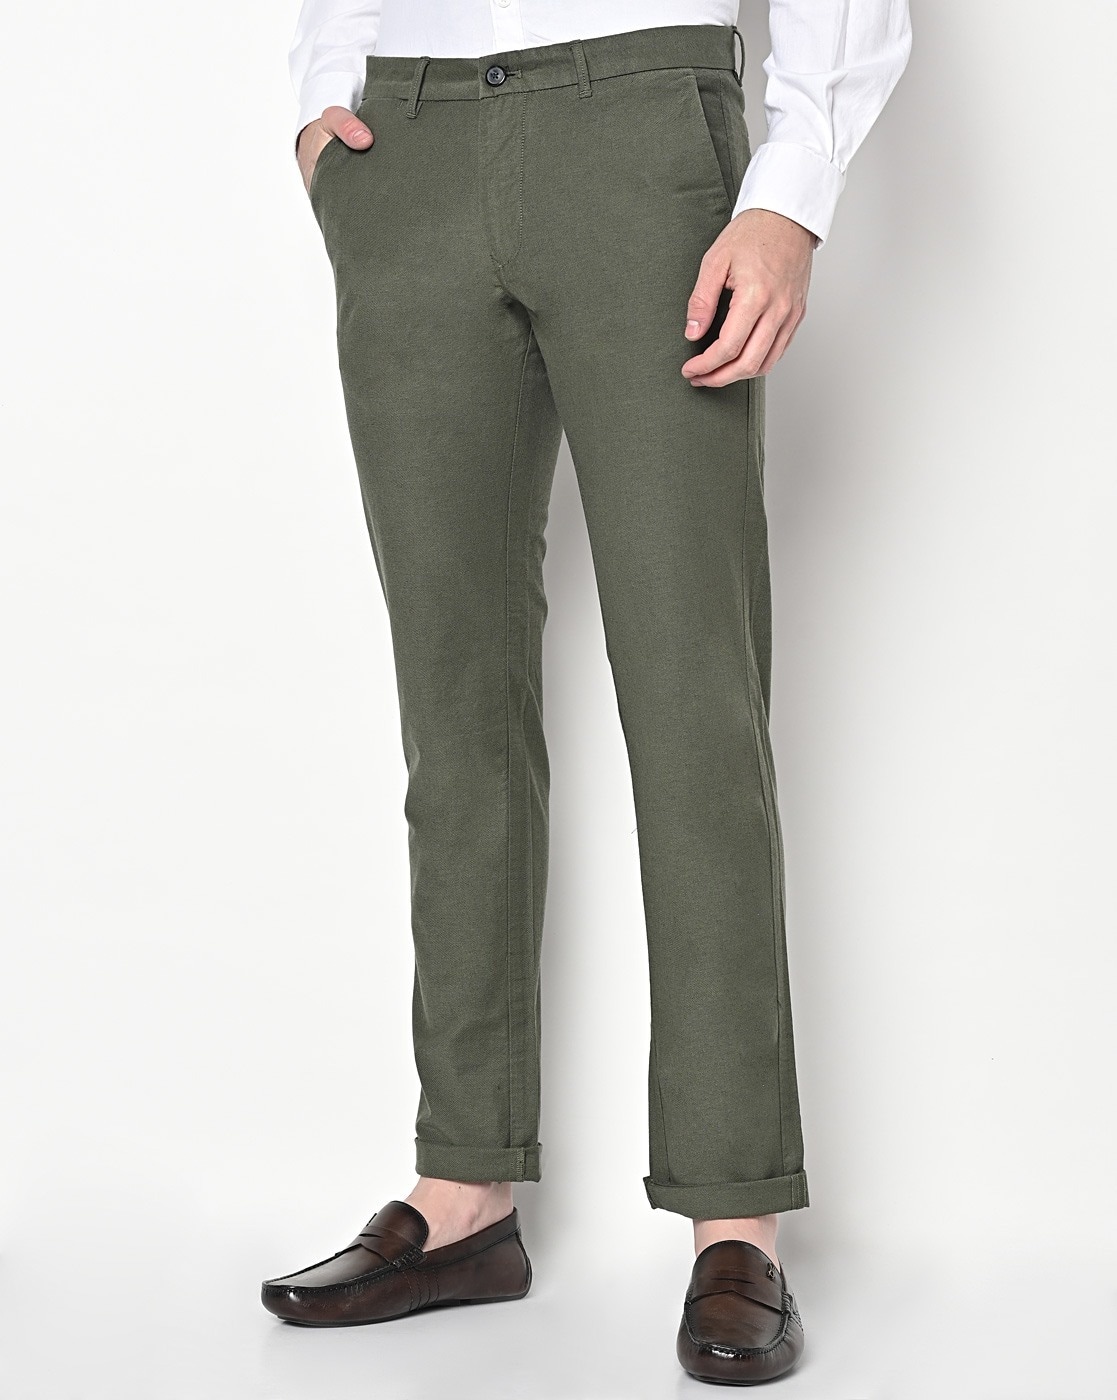 Buy Green Trousers & Pants for Women by Brucella Online | Ajio.com